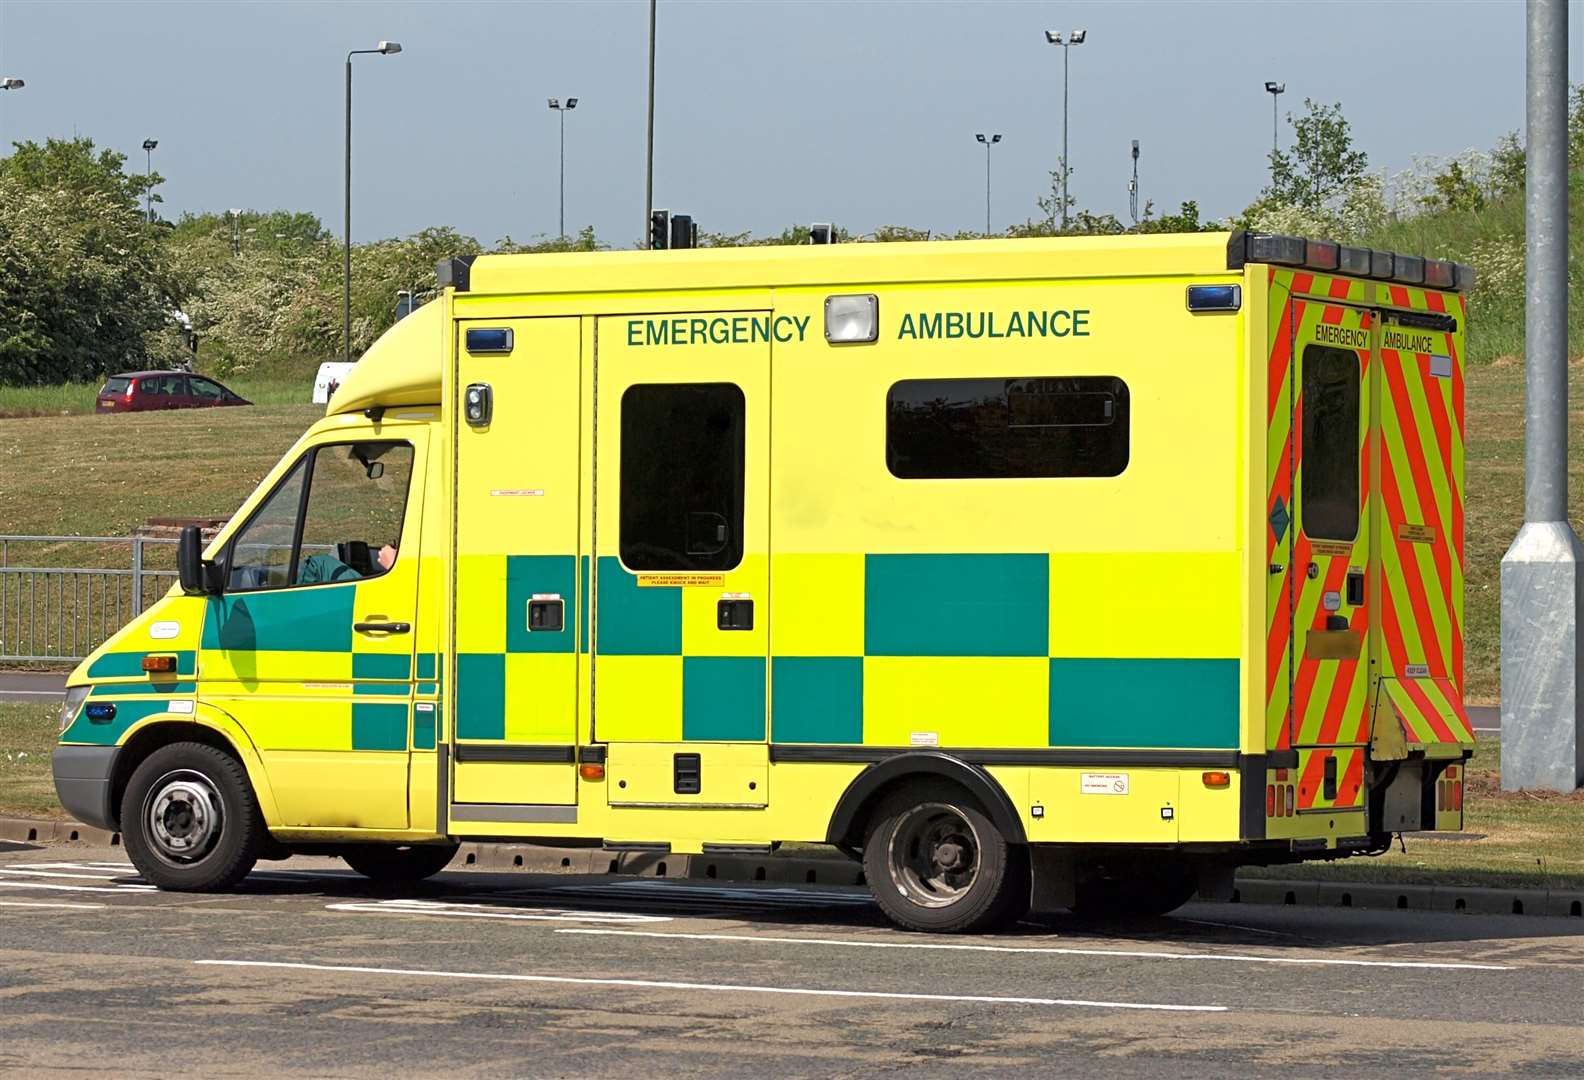 SECAmb have moved to the highest alert level. Stock Image